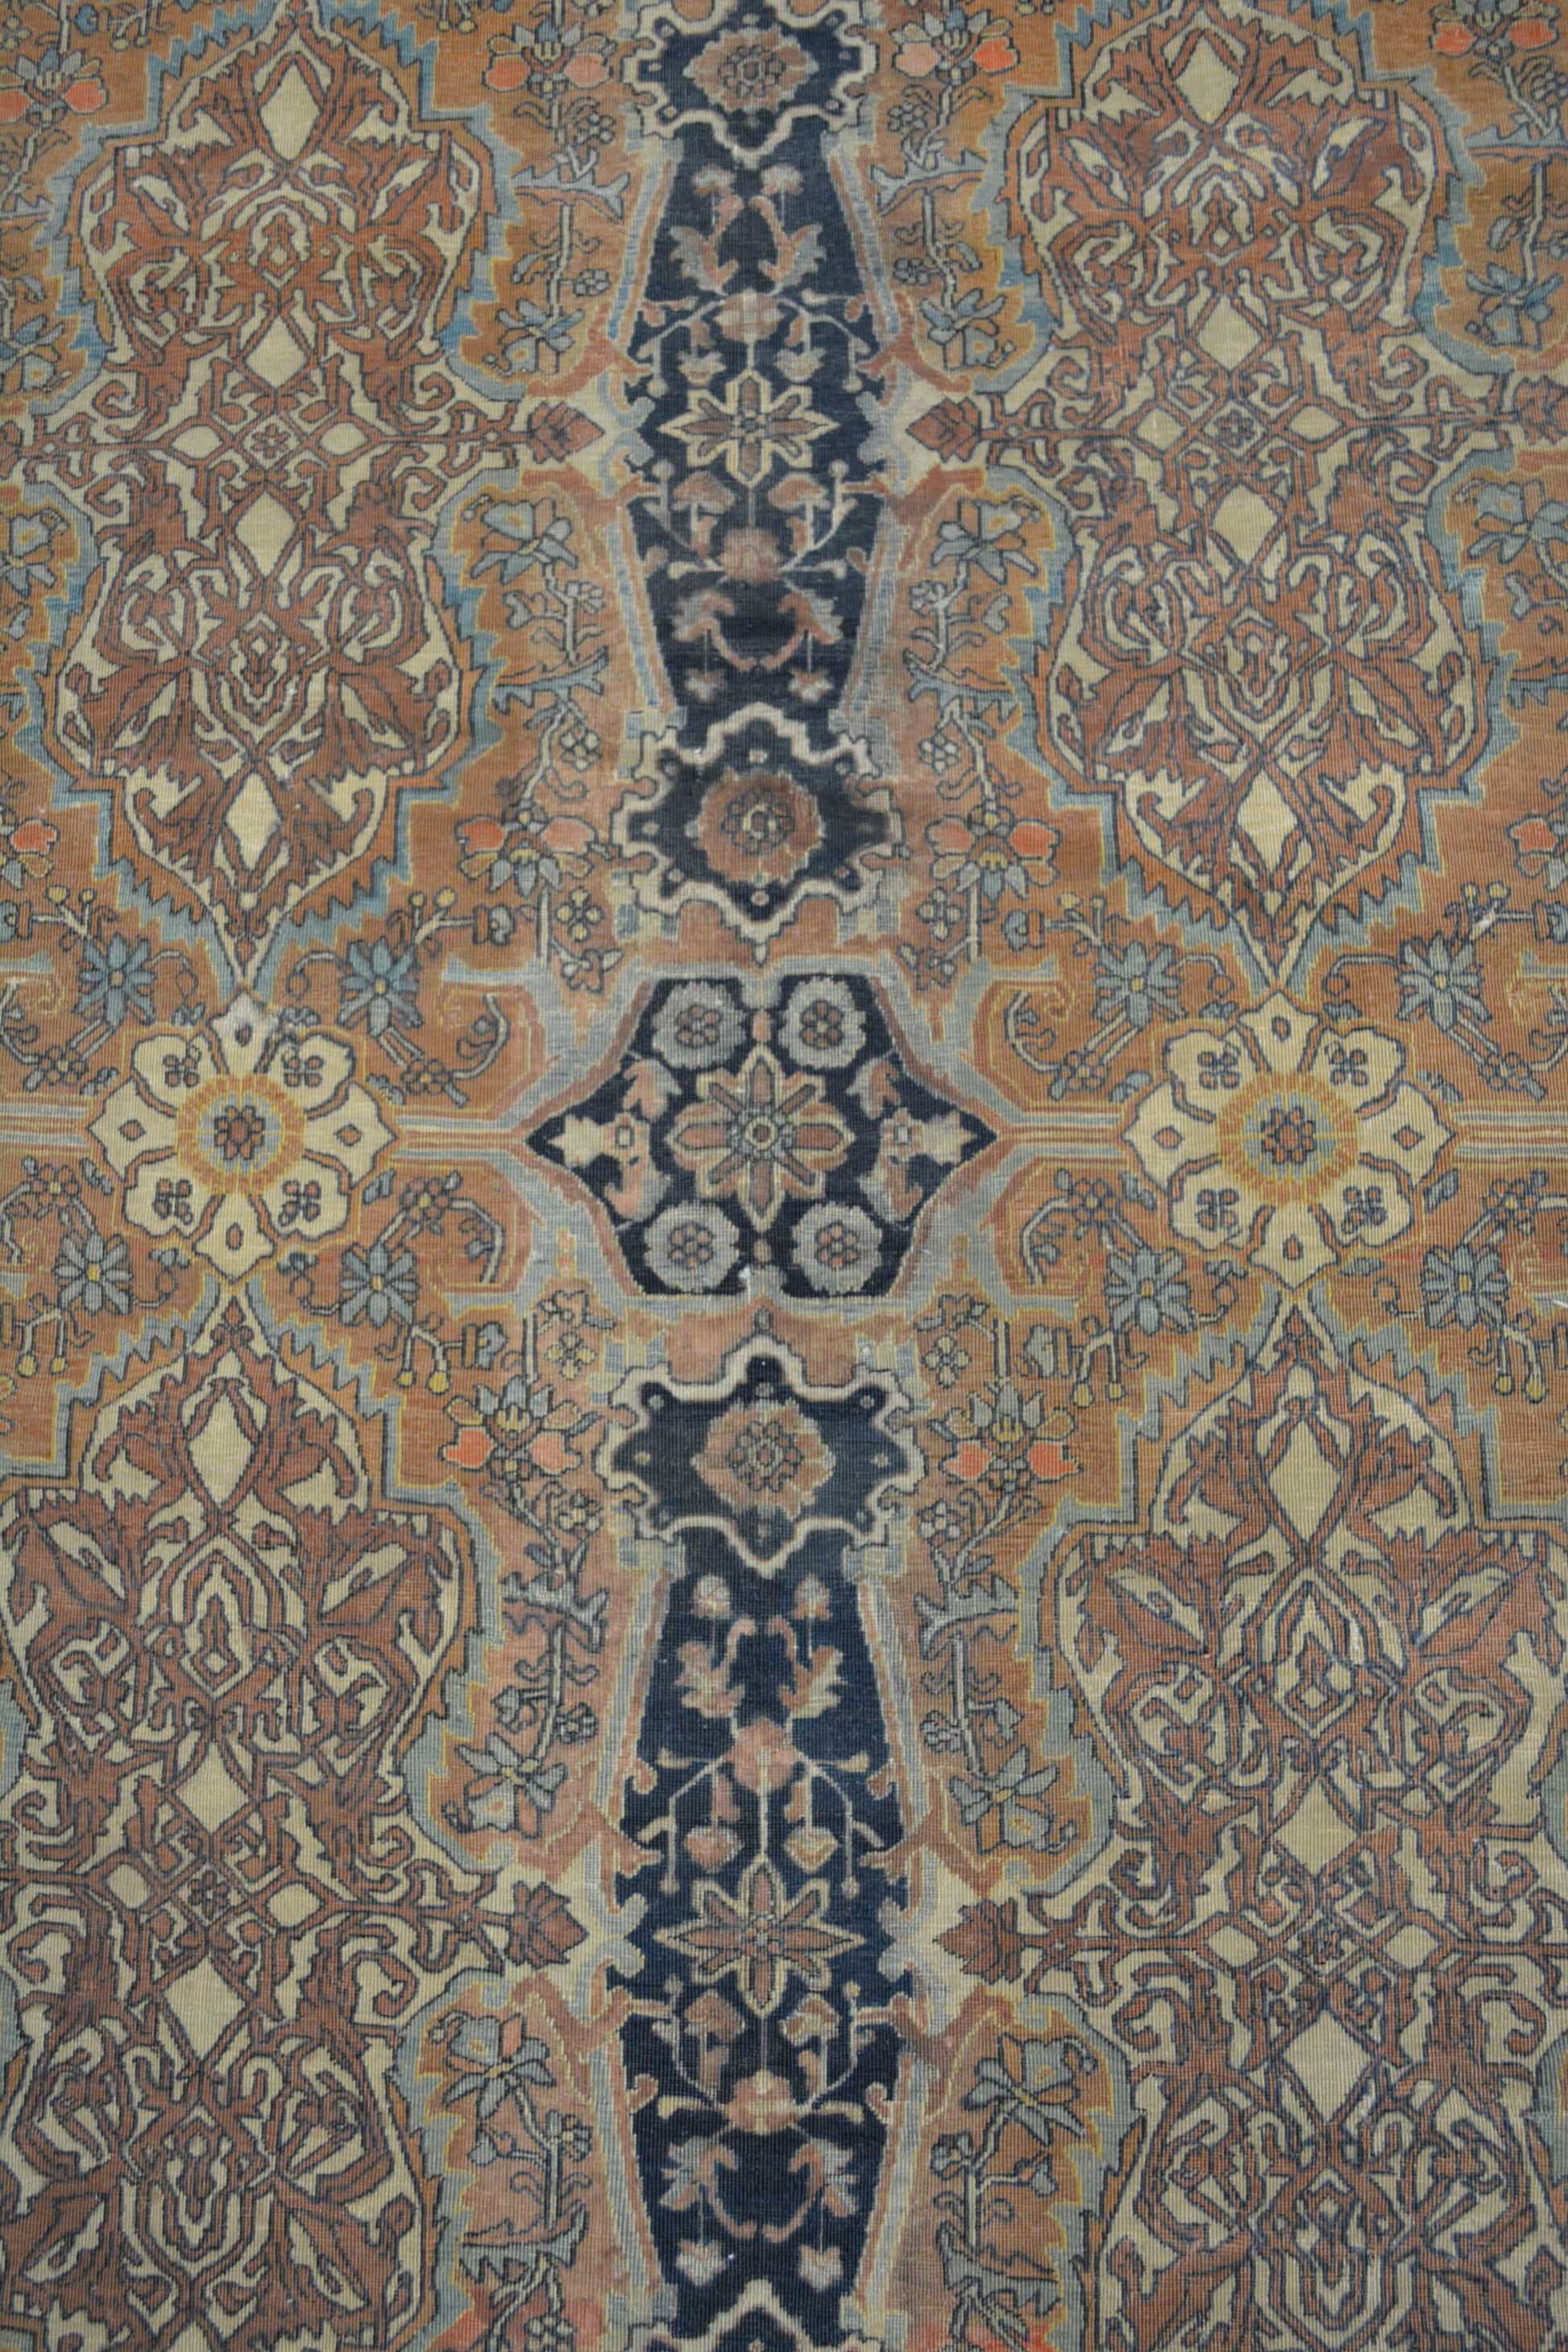 The center of the rug is packed with tiny flowers, branches and small geometrical details. All the pattern is arranged symmetrically.